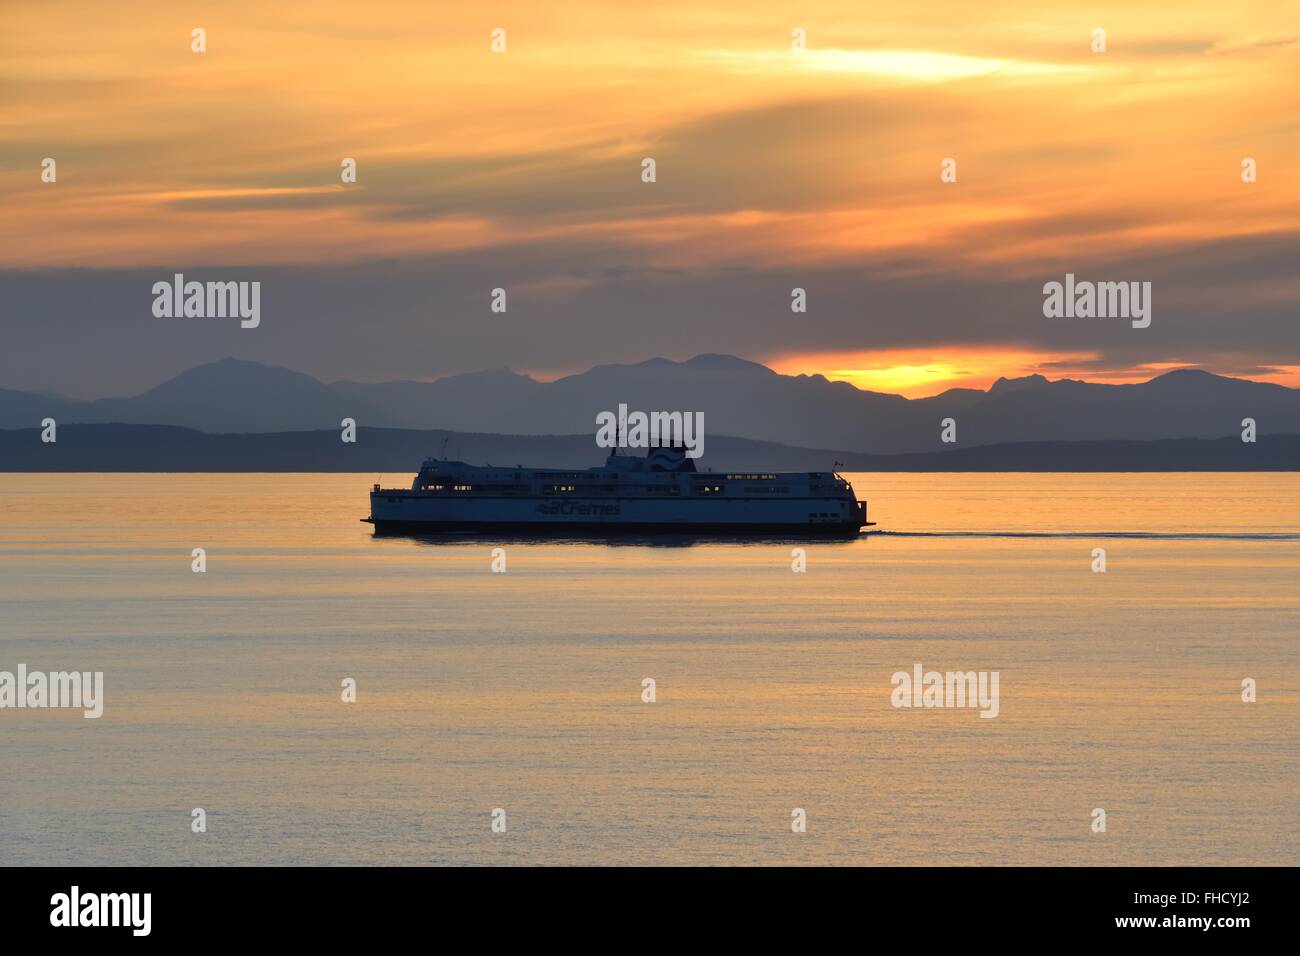 A BC ferries ferry sails though the channels of the North Pacific Ocean in Southern Alaska at sunset Stock Photo